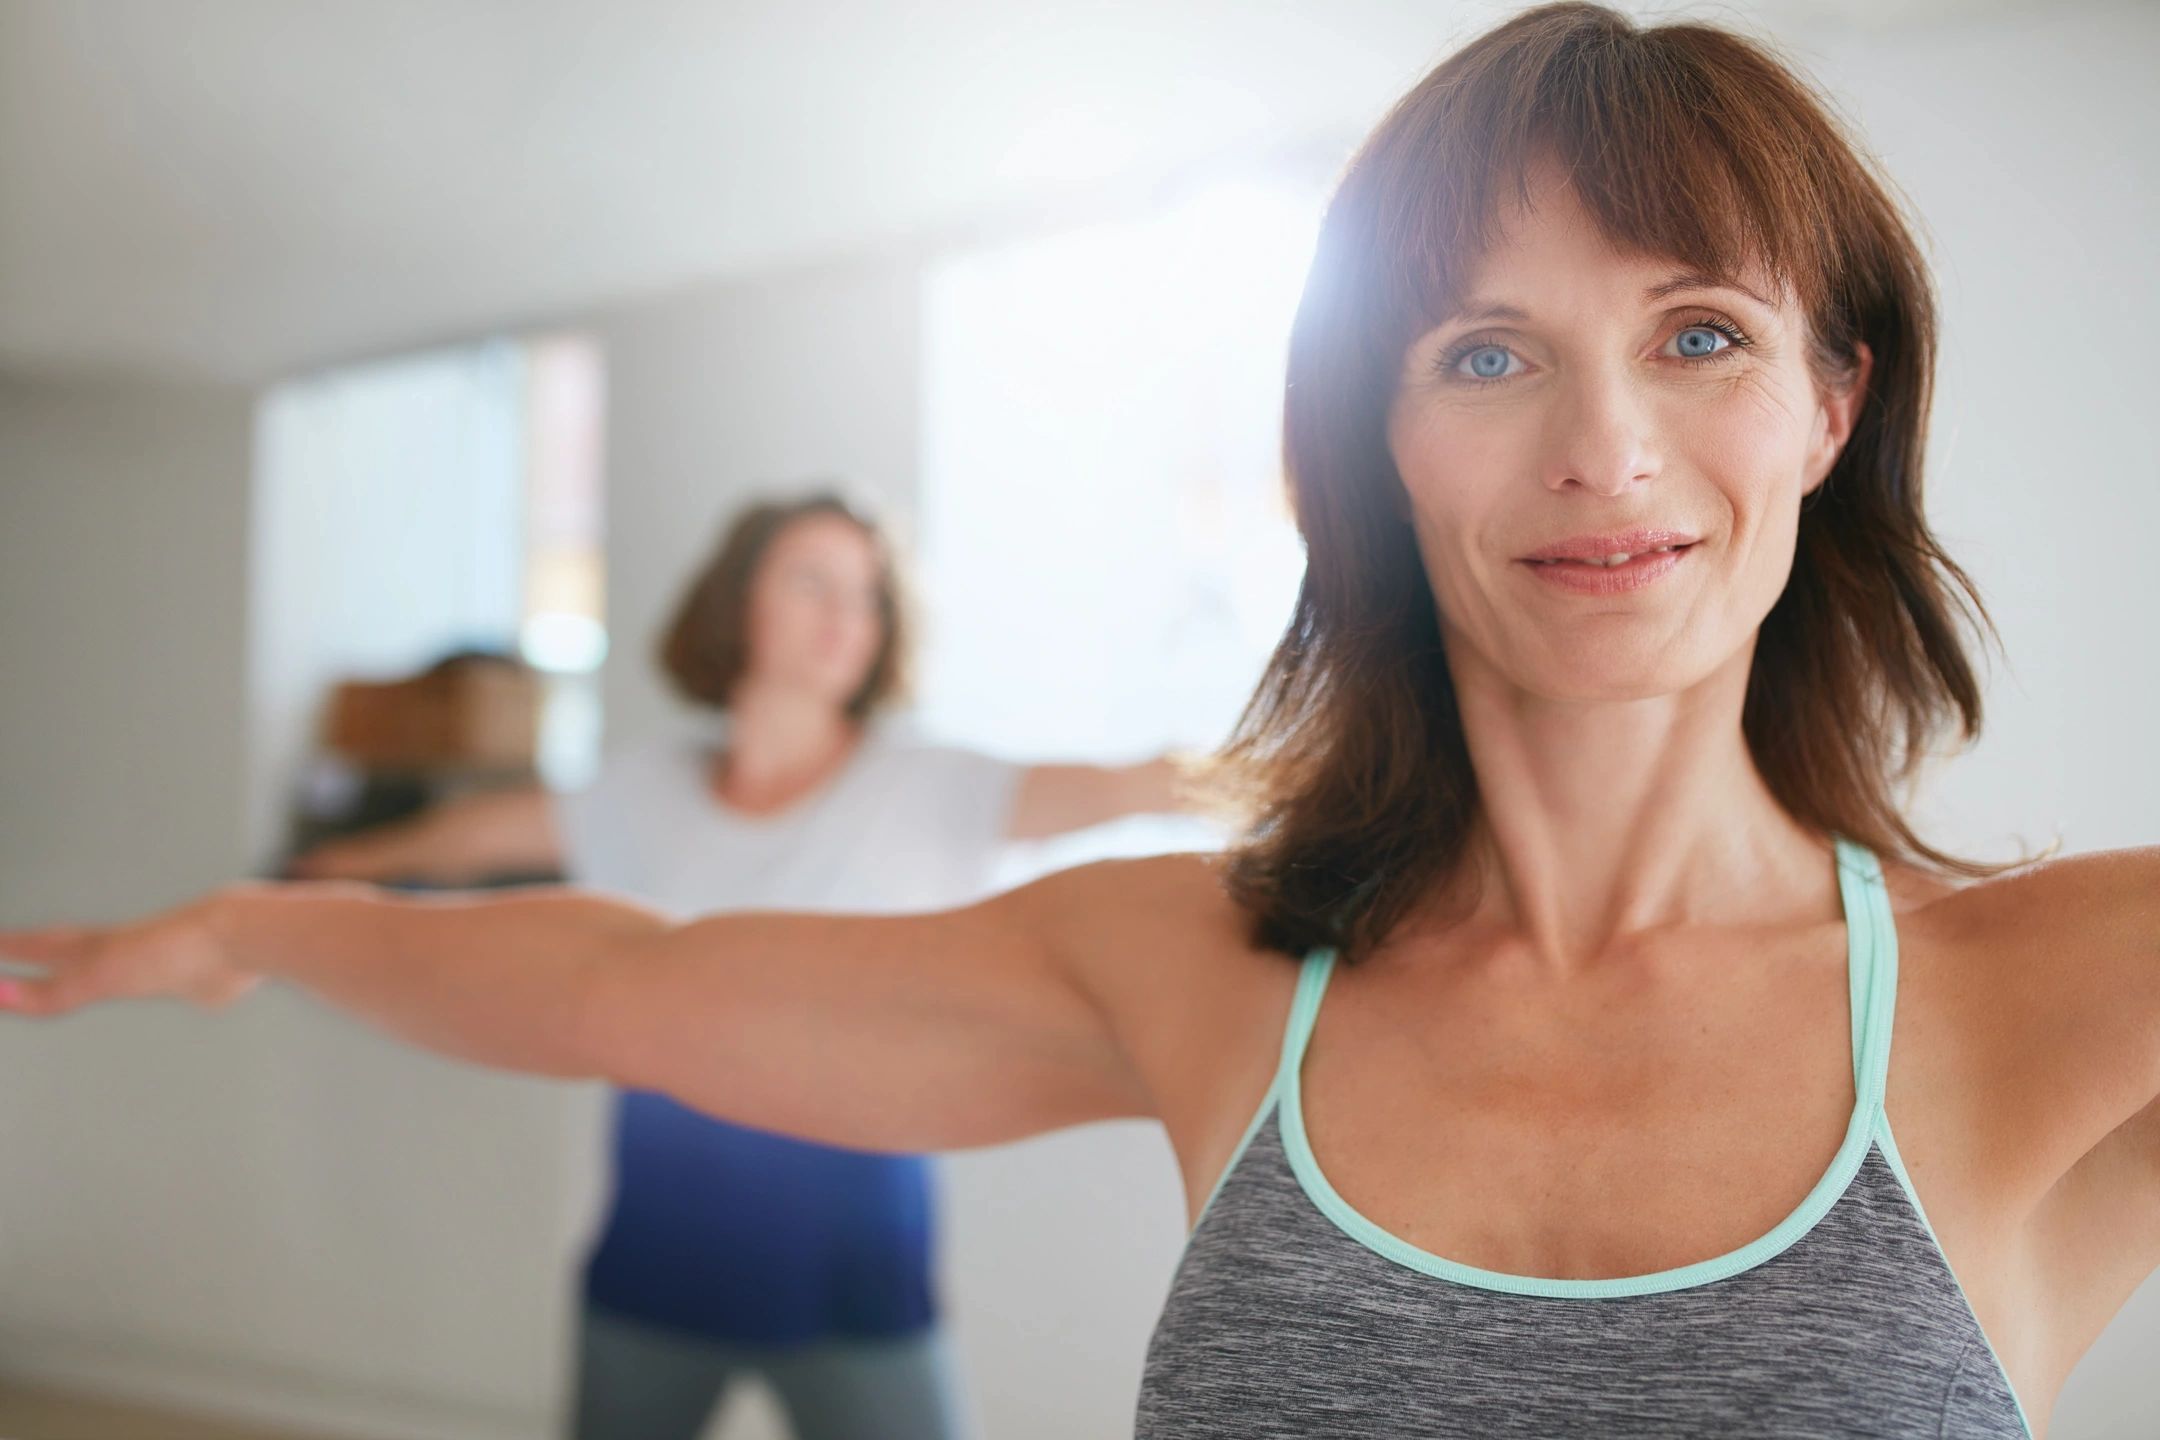 Can you achieve fitness over 60? It’s never too late.